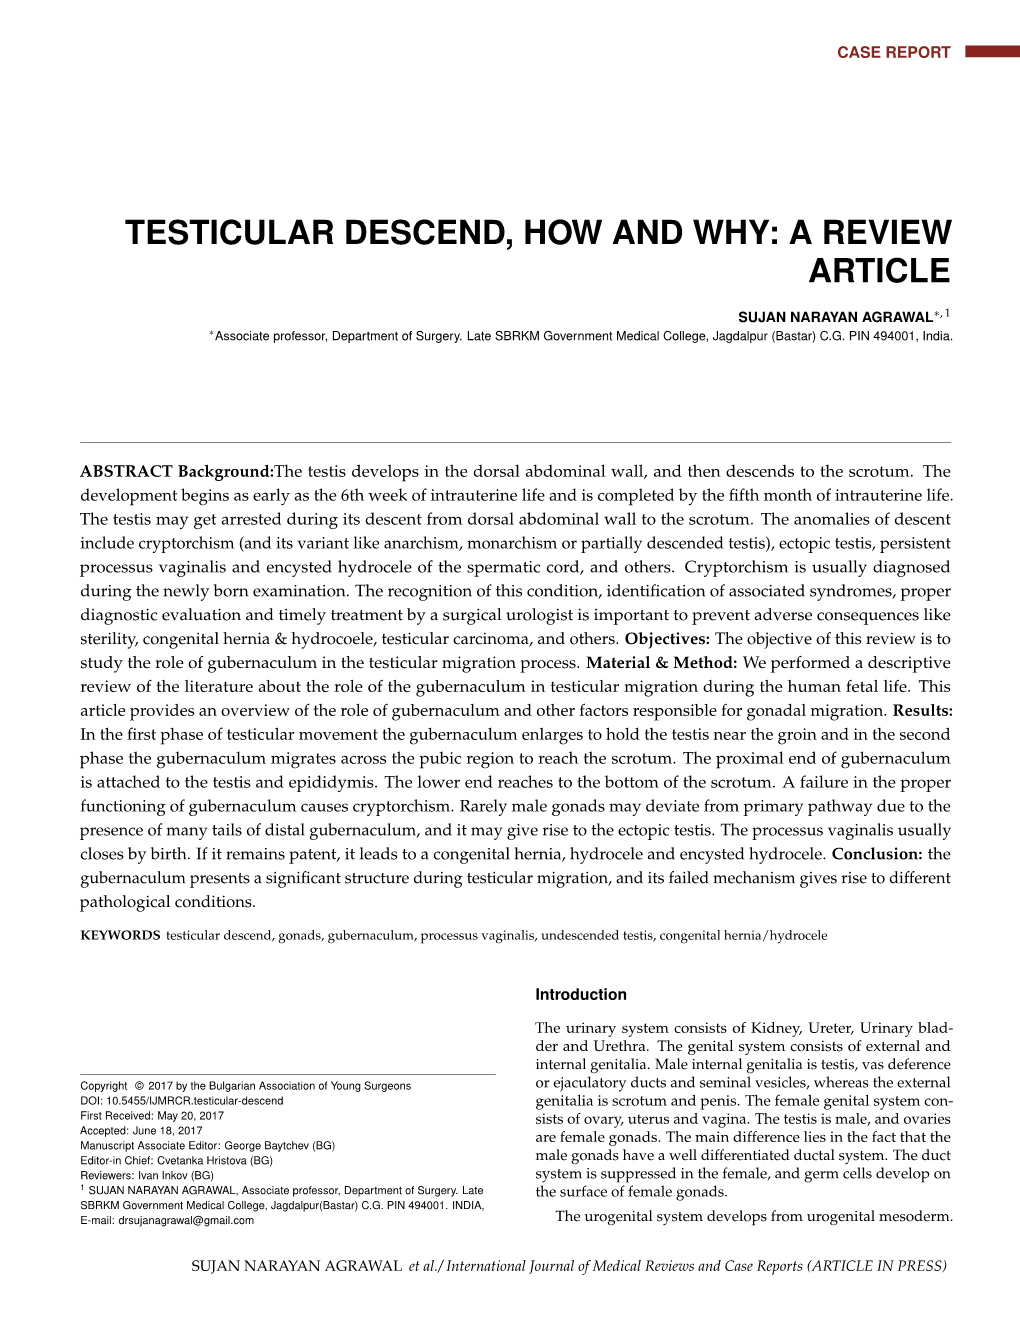 Testicular Descend, How and Why: a Review Article